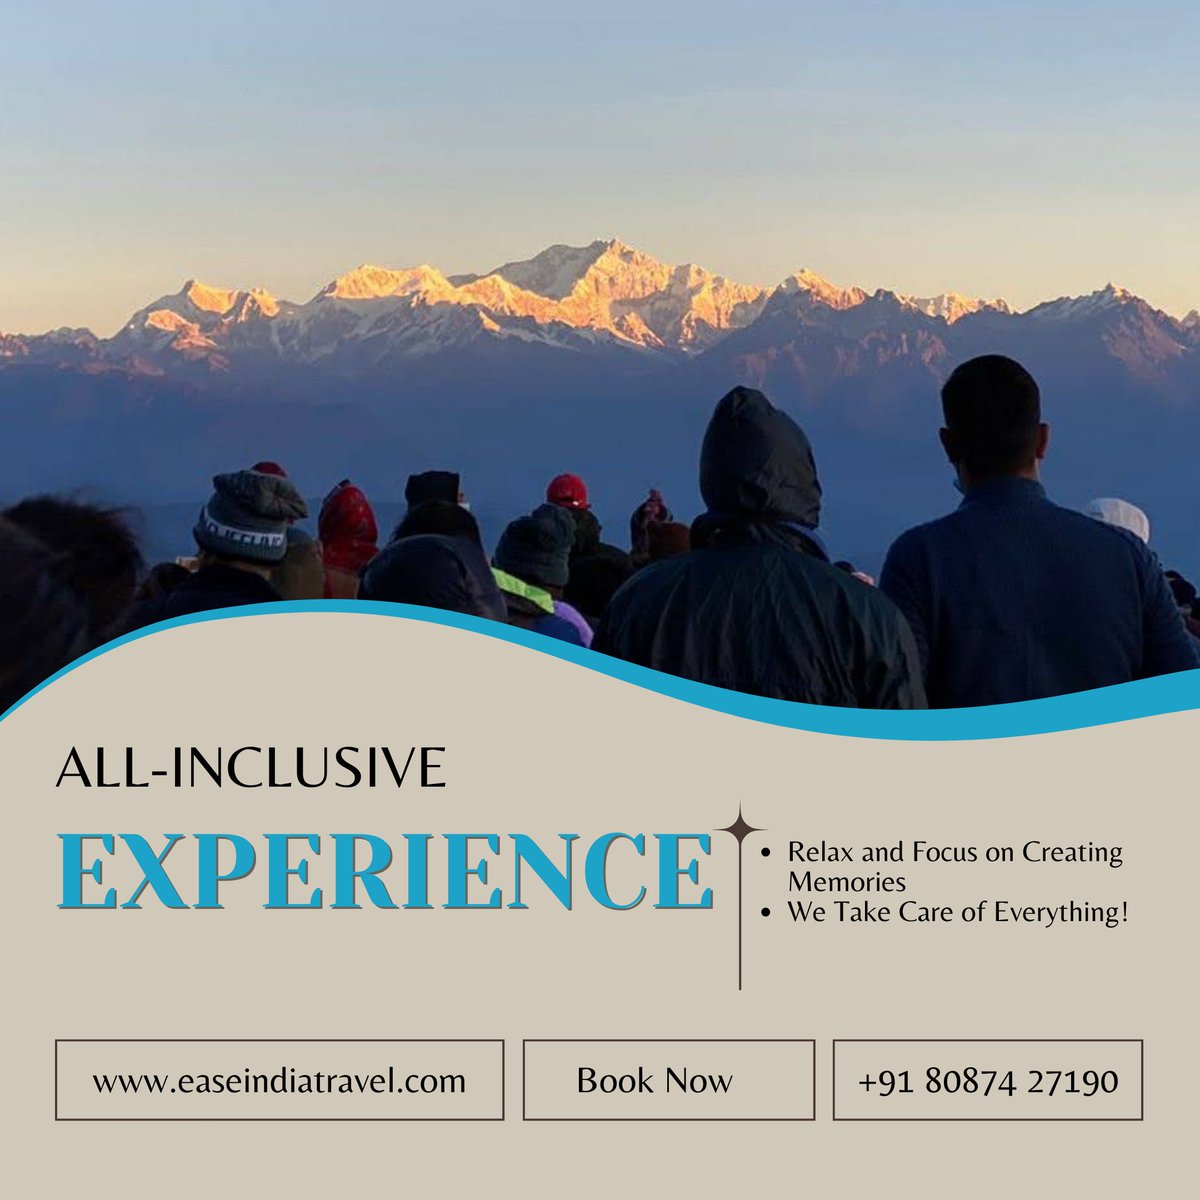 #Discover #Sikkim at your leisure with Ease India Travel's senior-friendly tours, blending #relaxation and exploration seamlessly.

#unbackpacking #experiencetravel #EaseIndiaTravel #SeniorTravel #gangtok #incredibleindia #Northeastindia #northsikkim  #himalayas @sikkimtourismin